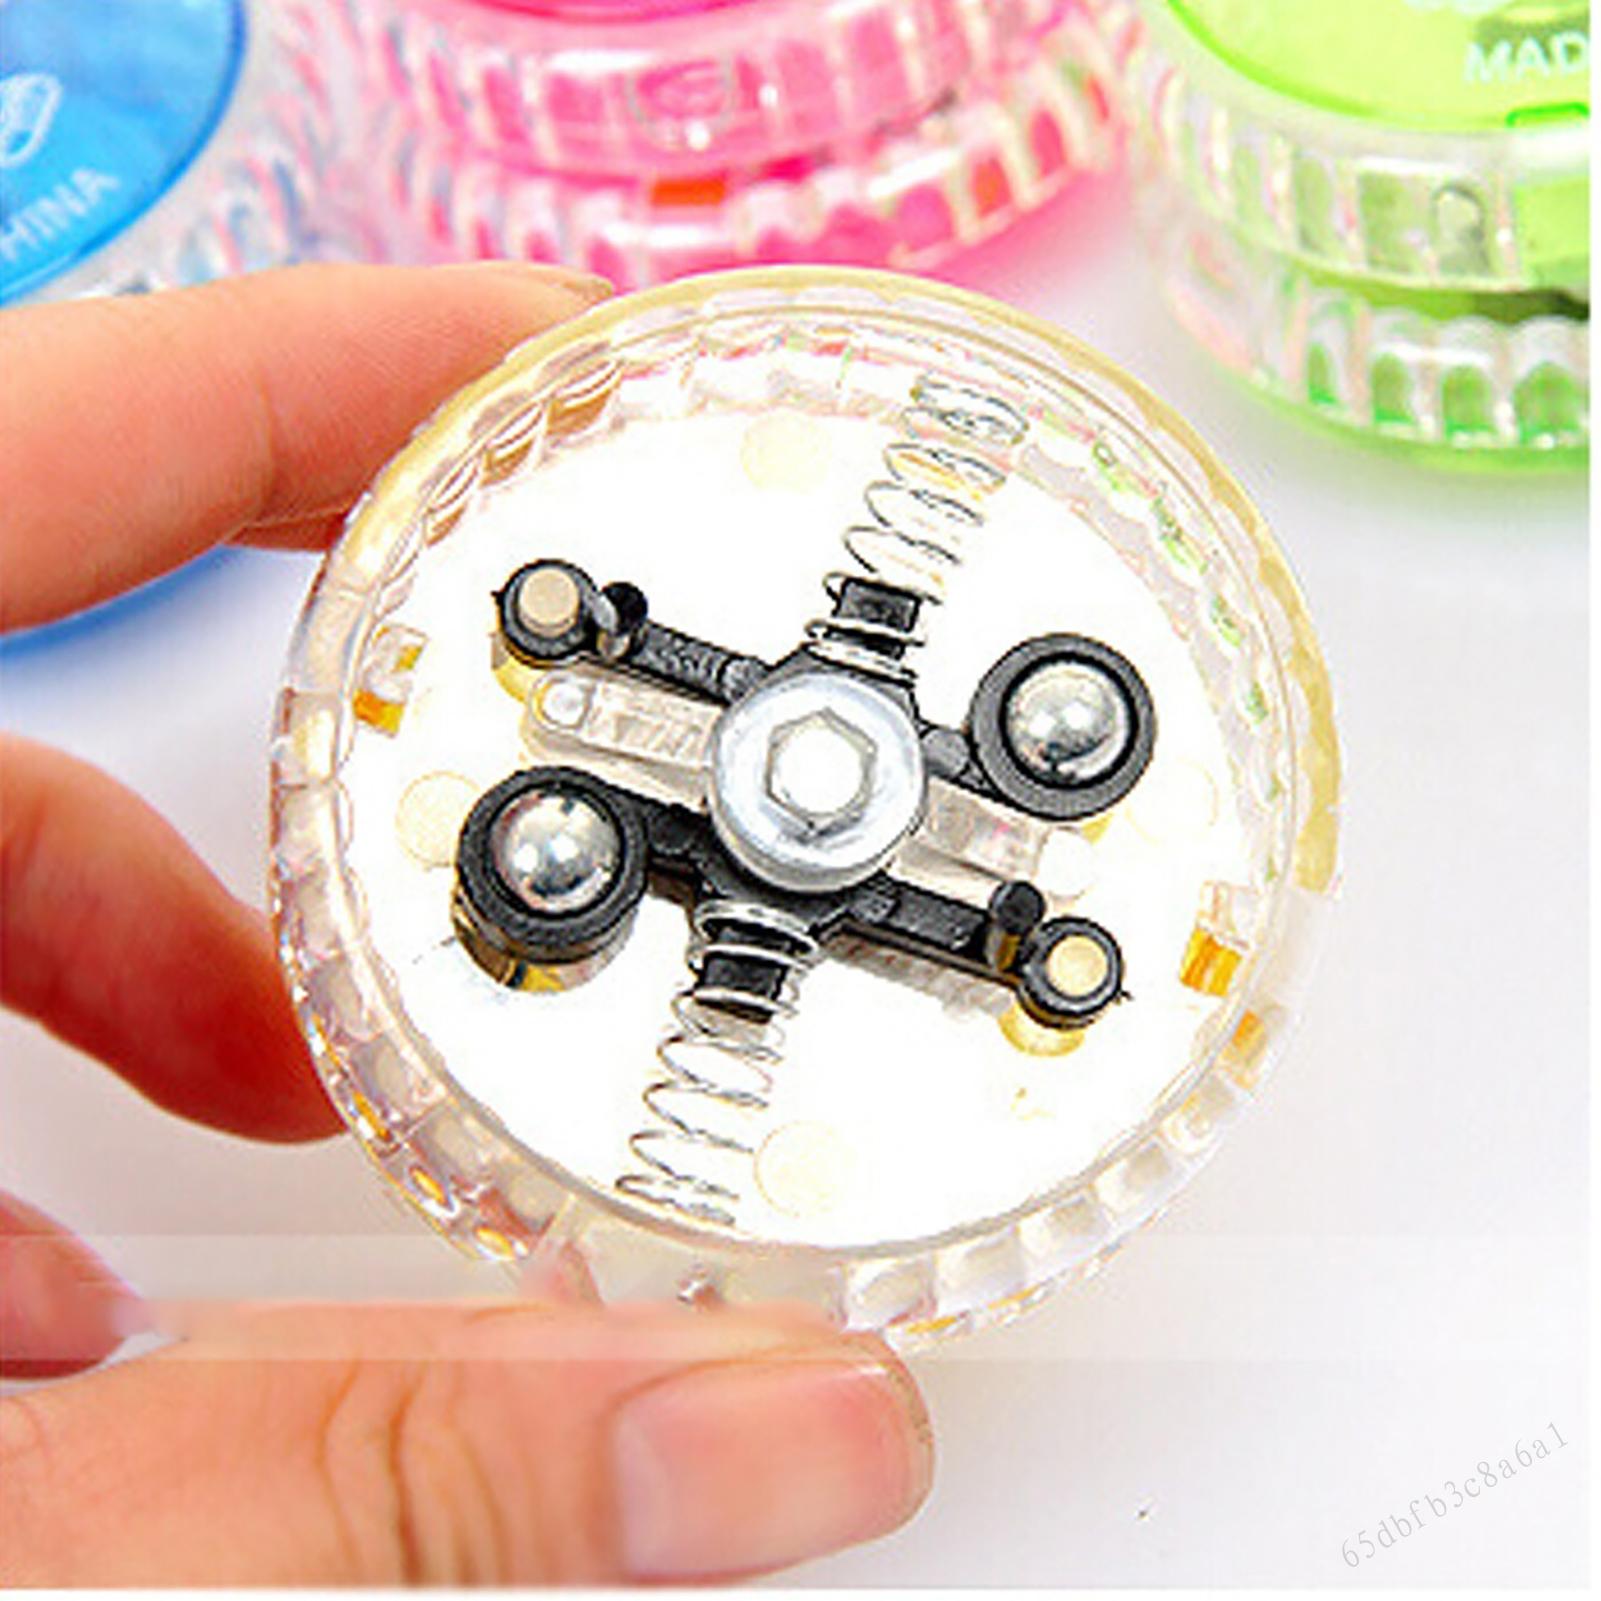 Flashing Led Glow Light Up Yoyo Easy To Stabilize and Easy To Hang Yo